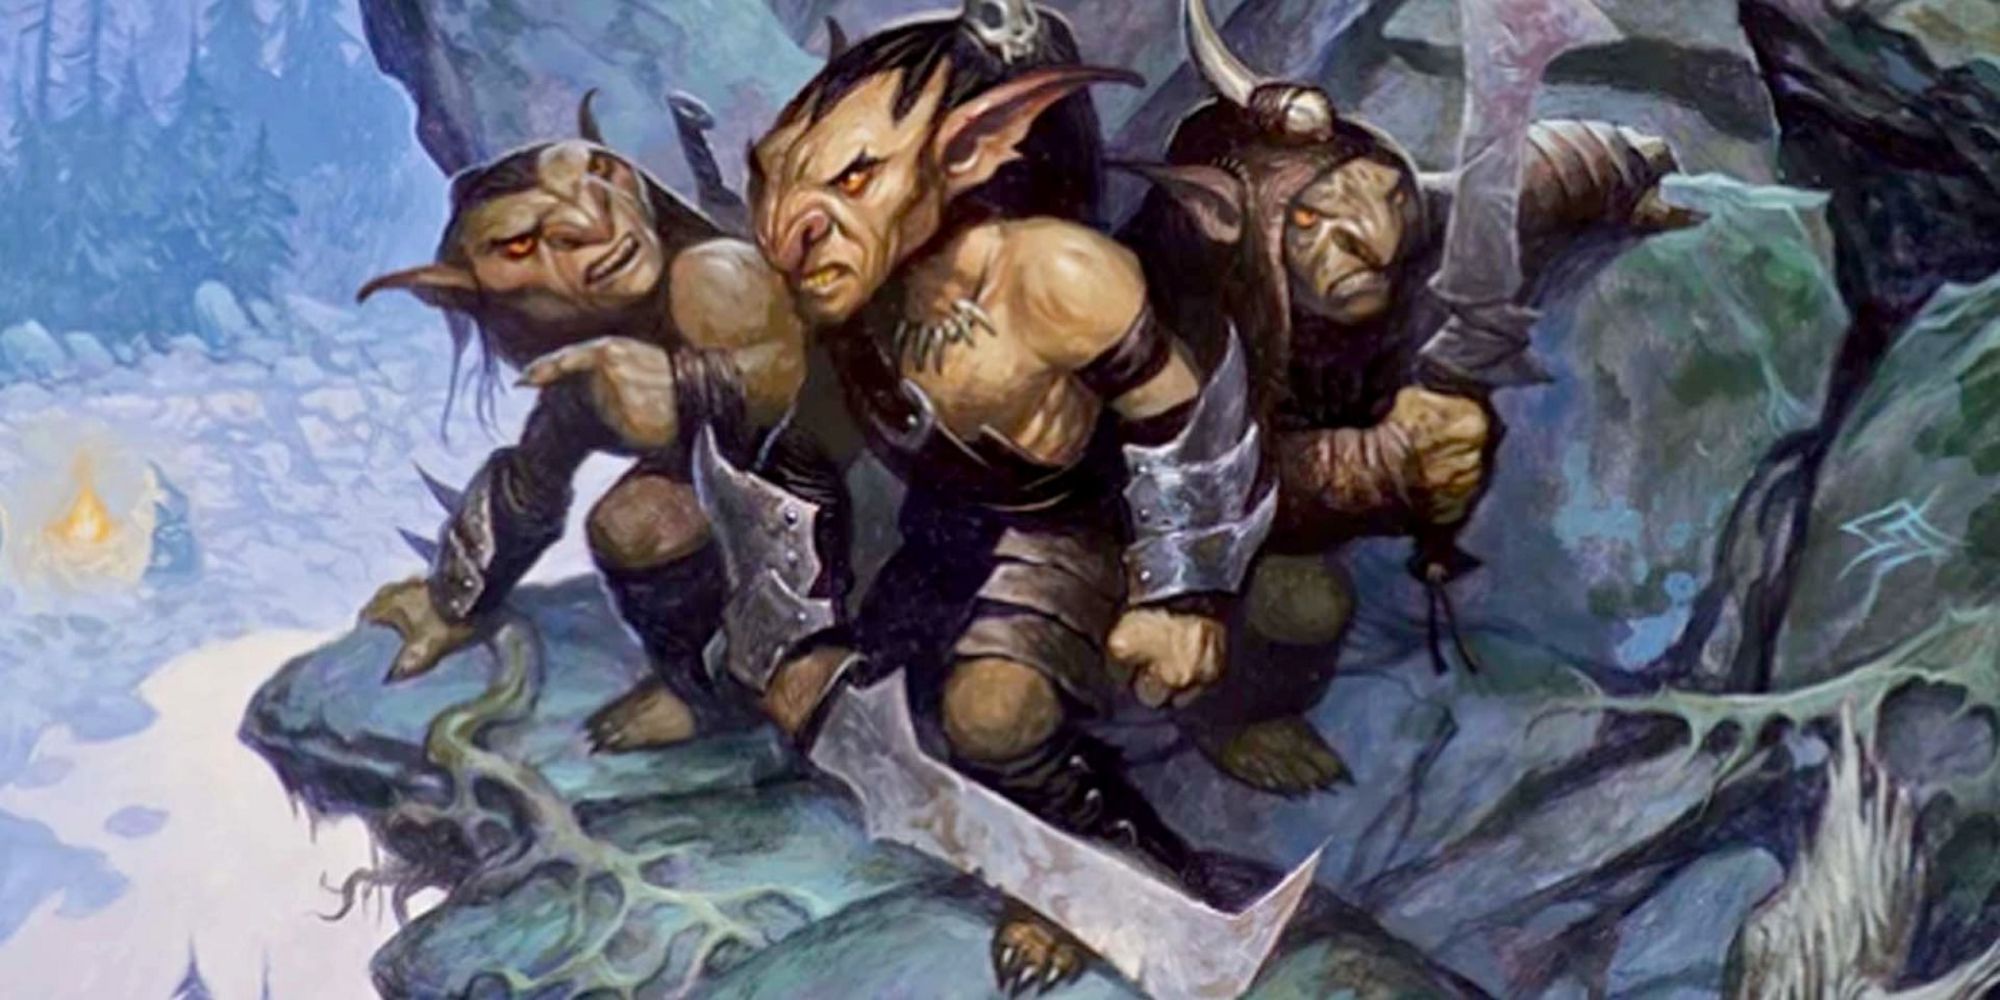 d&d goblins standing on a rocky cliff with weapons